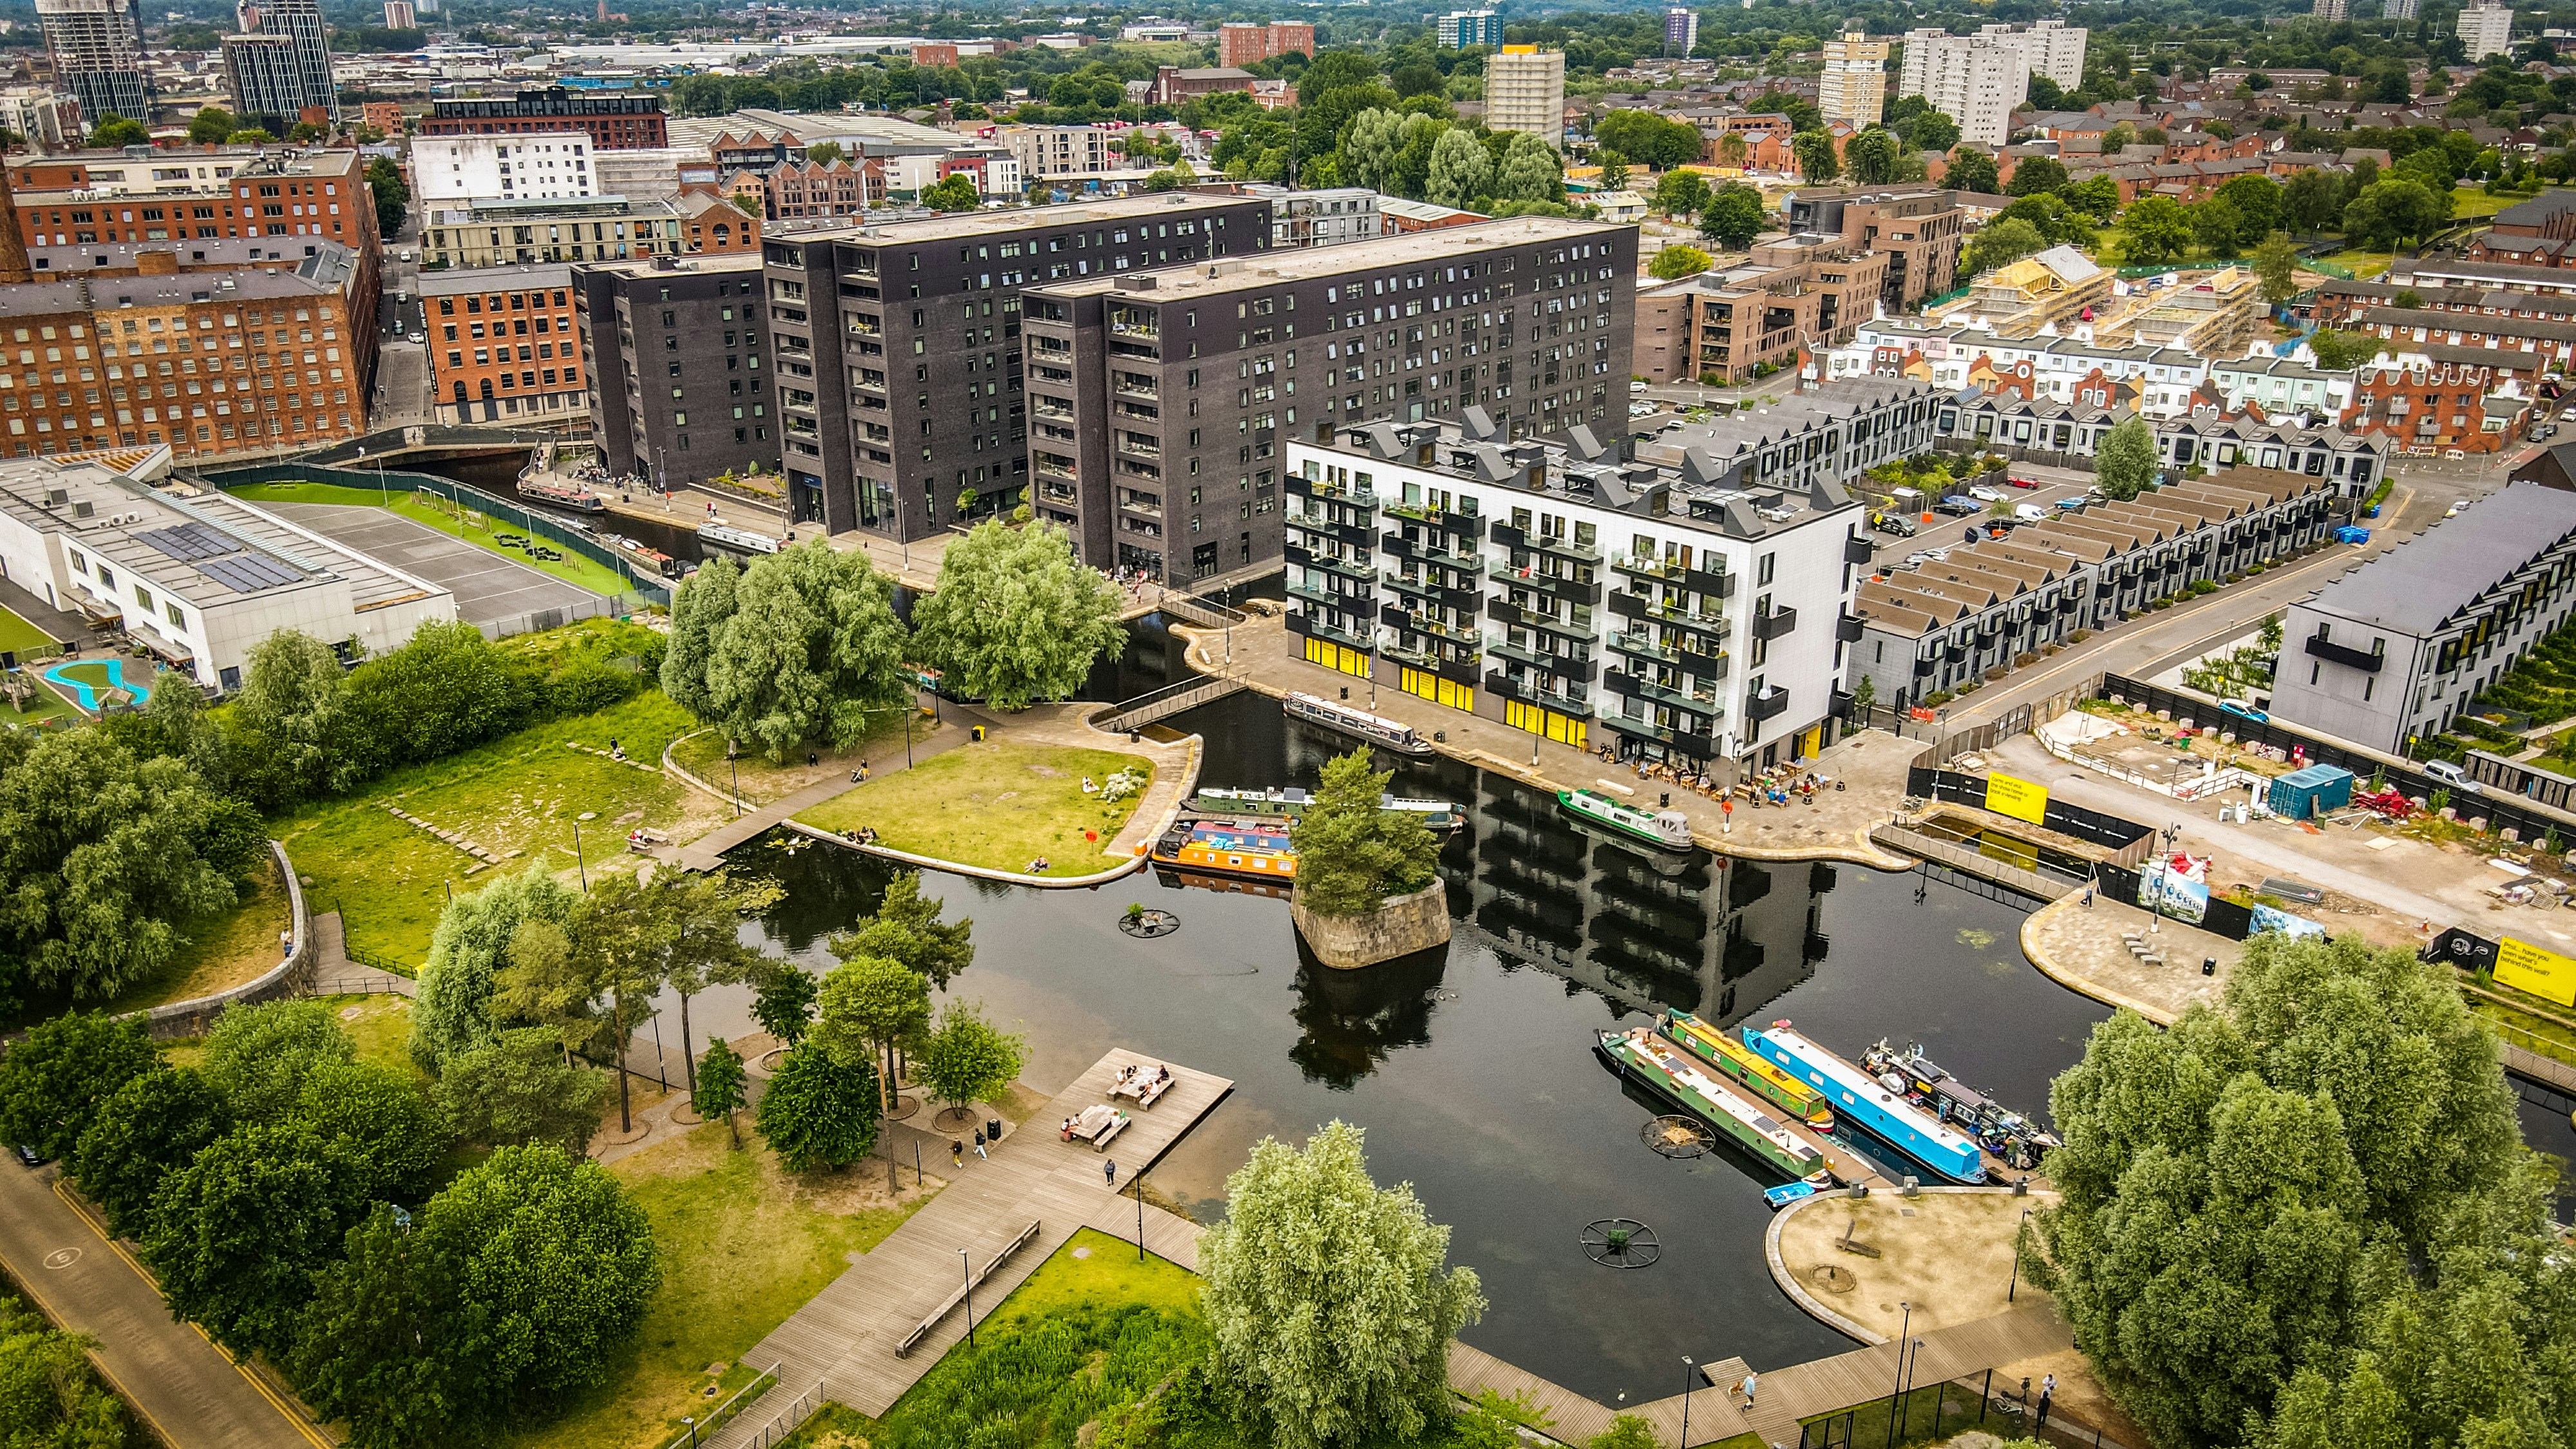 Dronw shot over New Islington Marina in Manchester, UK. One of only a few areas now with greenery in the city centre